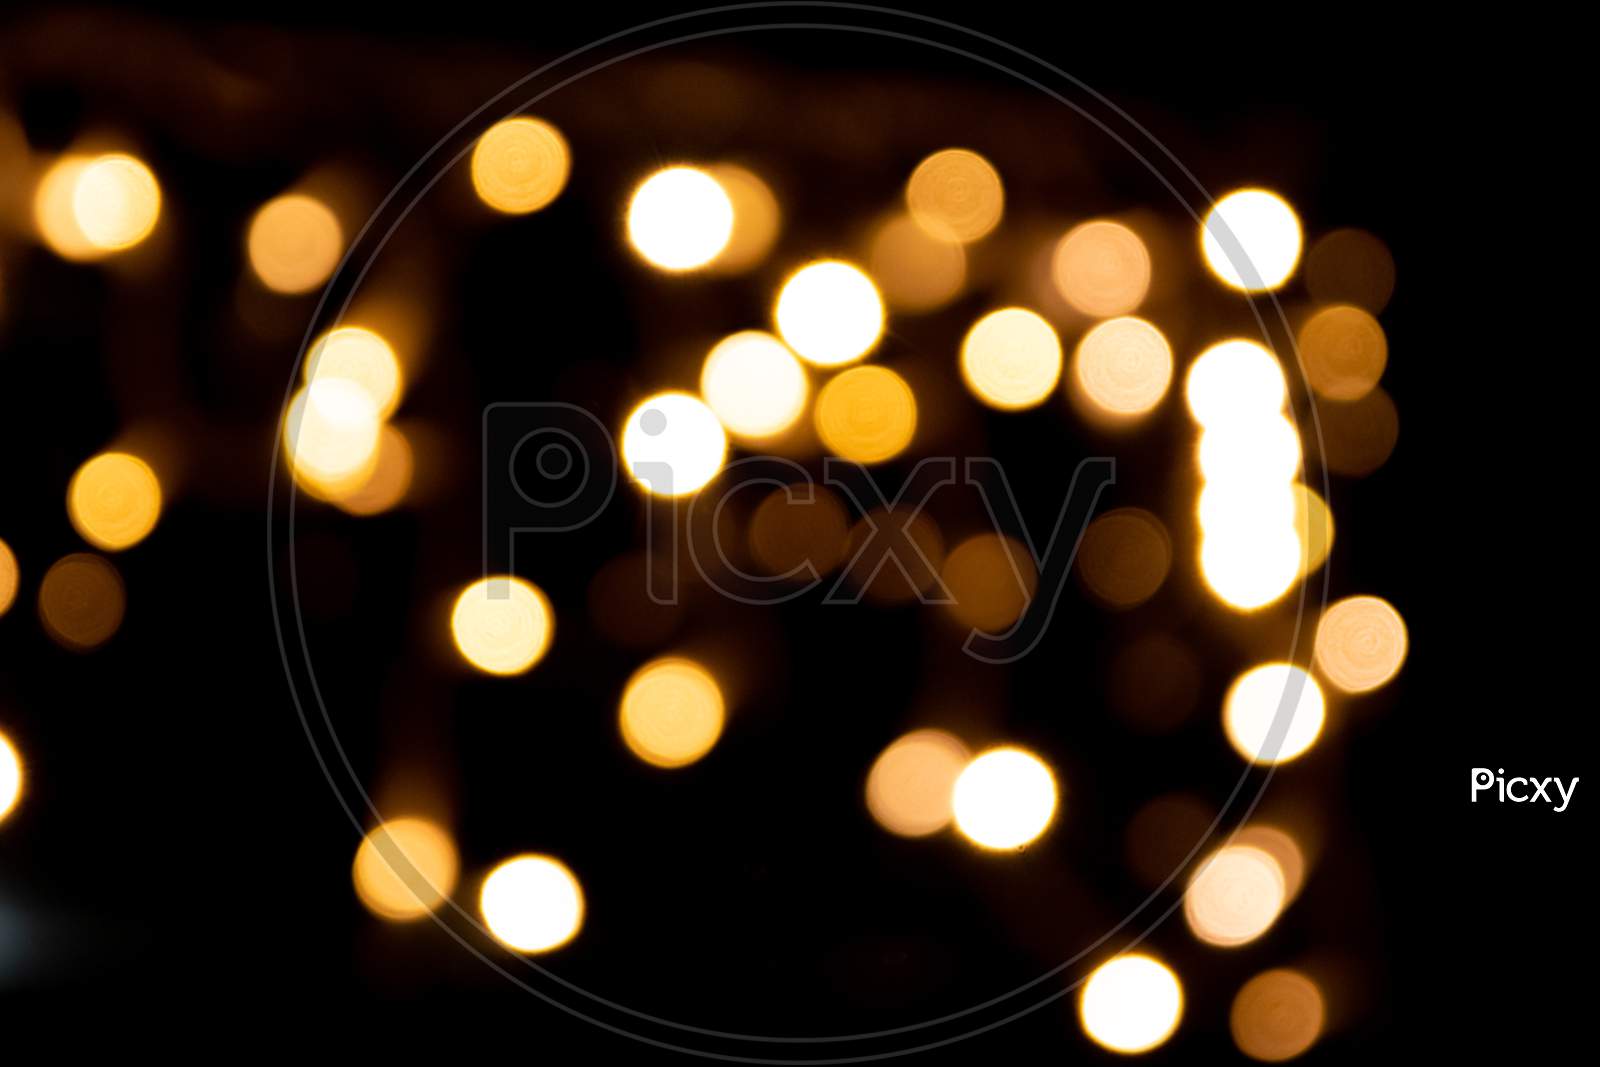 Shiny golden bokeh background for festive celebrations like christmas, silvester and a happy new year party as well as elegant invitation cards to celebrate with glitter rain and noble guests together